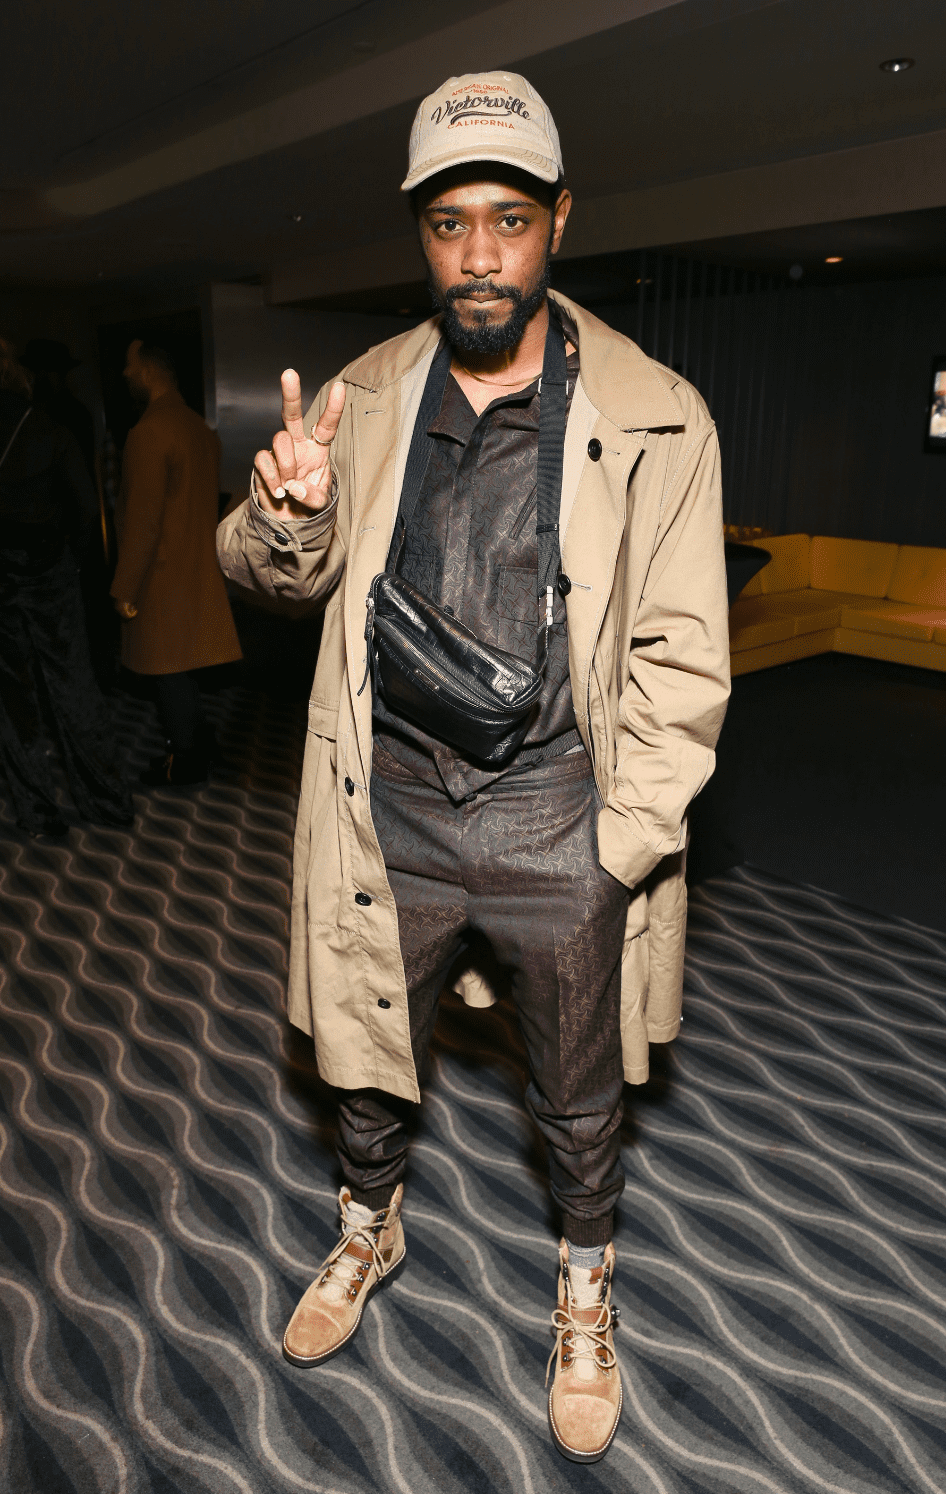  Lakeith Stanfield attends the first screening of Universal Pictures' "US" in Los Angeles on March 8, 2019 in West Hollywood, California. | Source: Getty Images